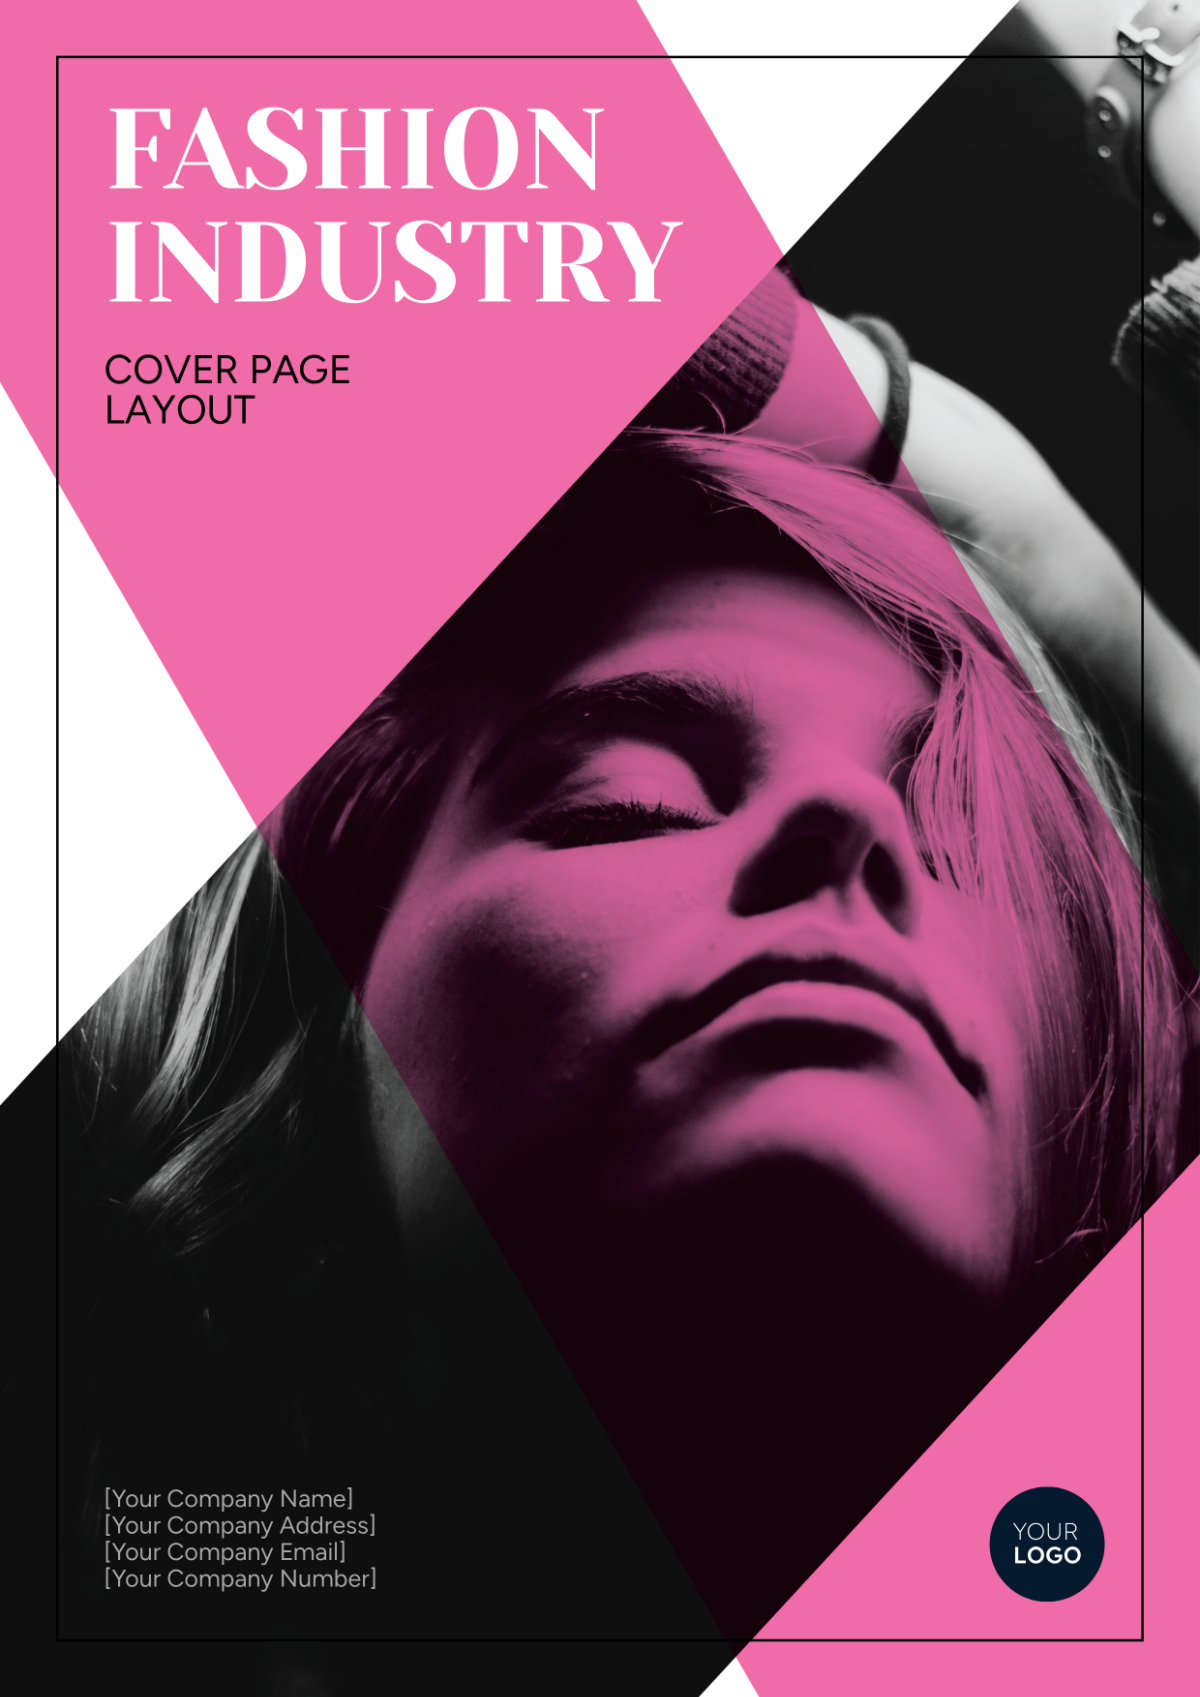 Fashion Industry Cover Page Layout